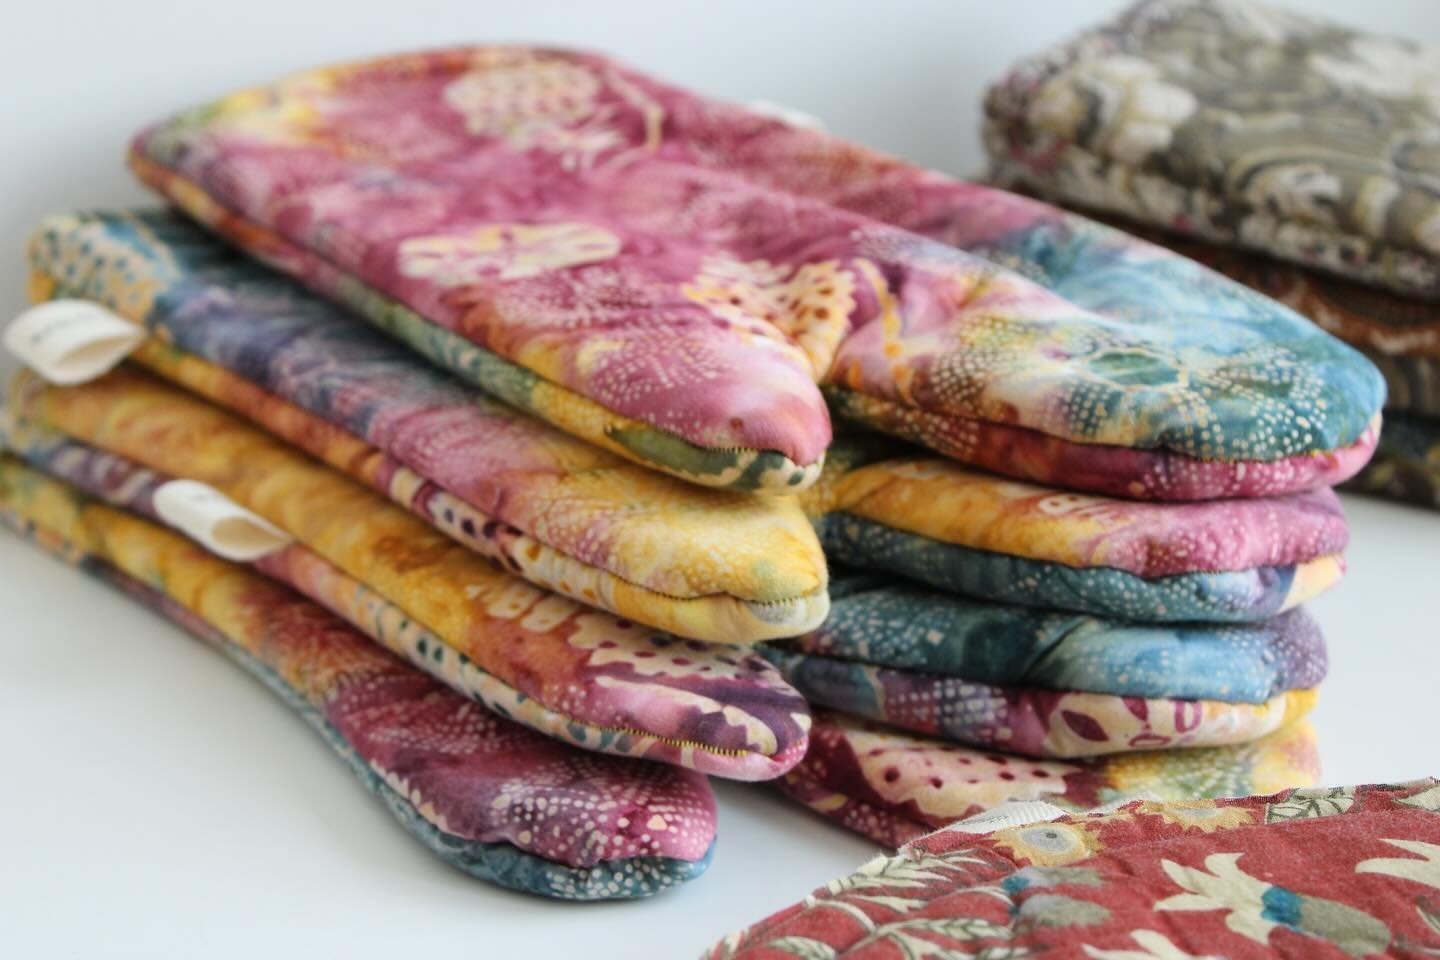 🌸 Spring has sprung! 🌼 Exciting news &ndash; our LB HomeDecor Line has blossomed into the kitchen! Introducing our brand-new Oven Mitts and Trivets handcrafted from upcycled cotton quilts! 🧵 Available exclusively via DM for now, these beauties are